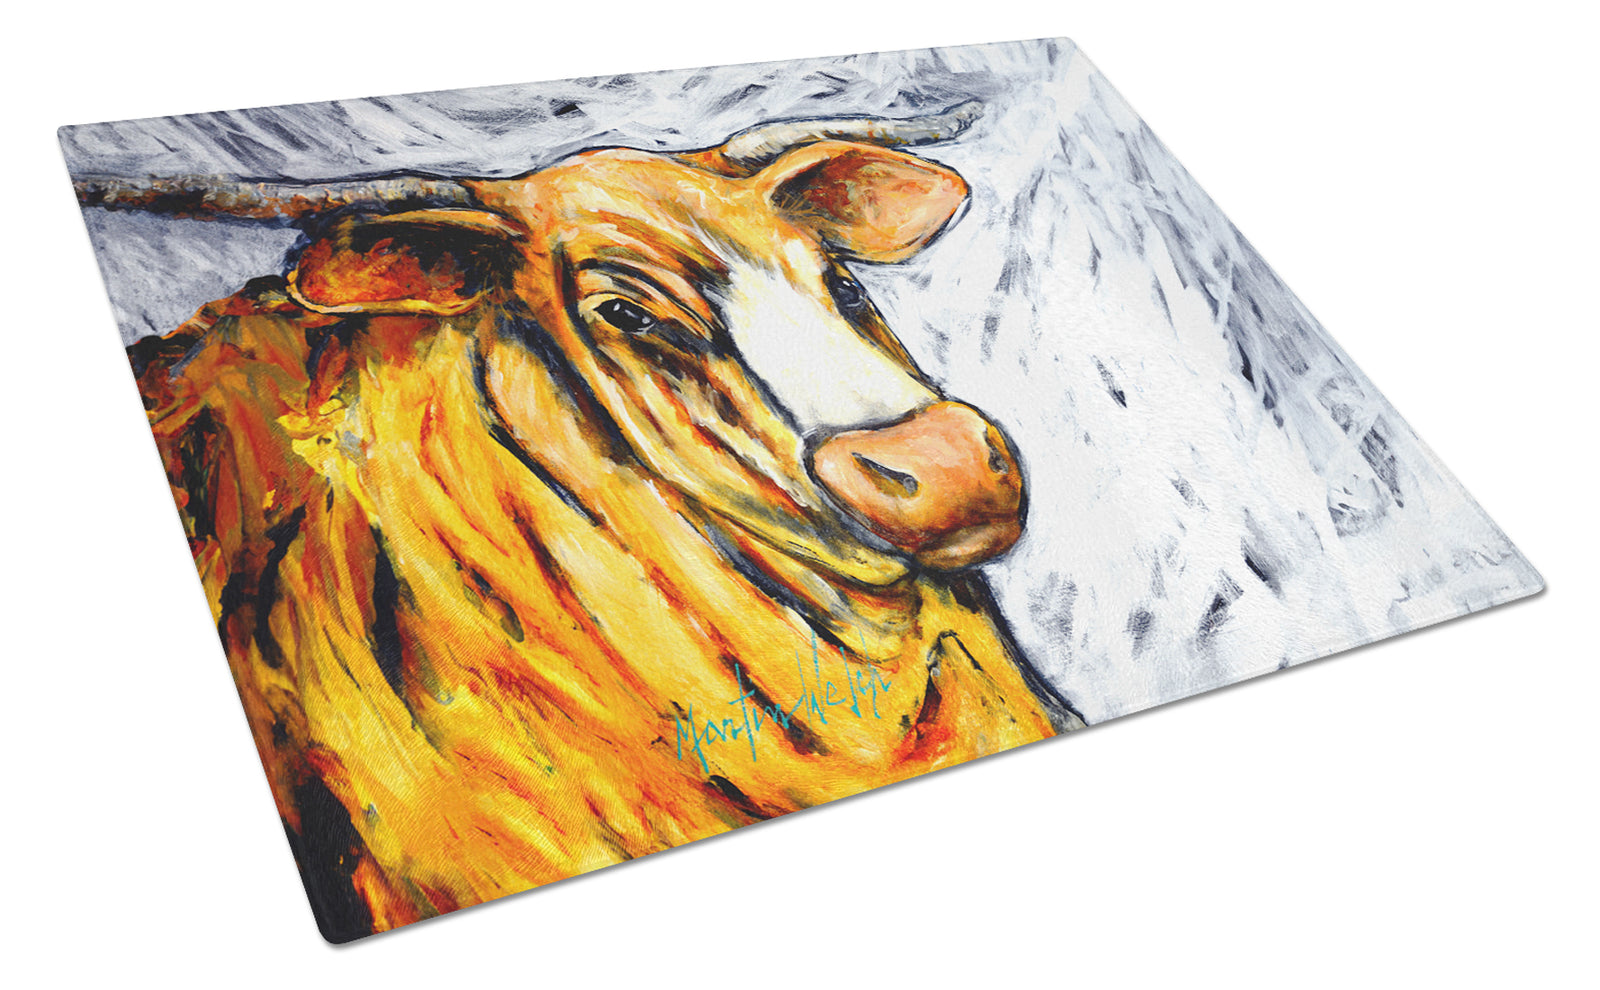 Buy this Bully Glass Cutting Board